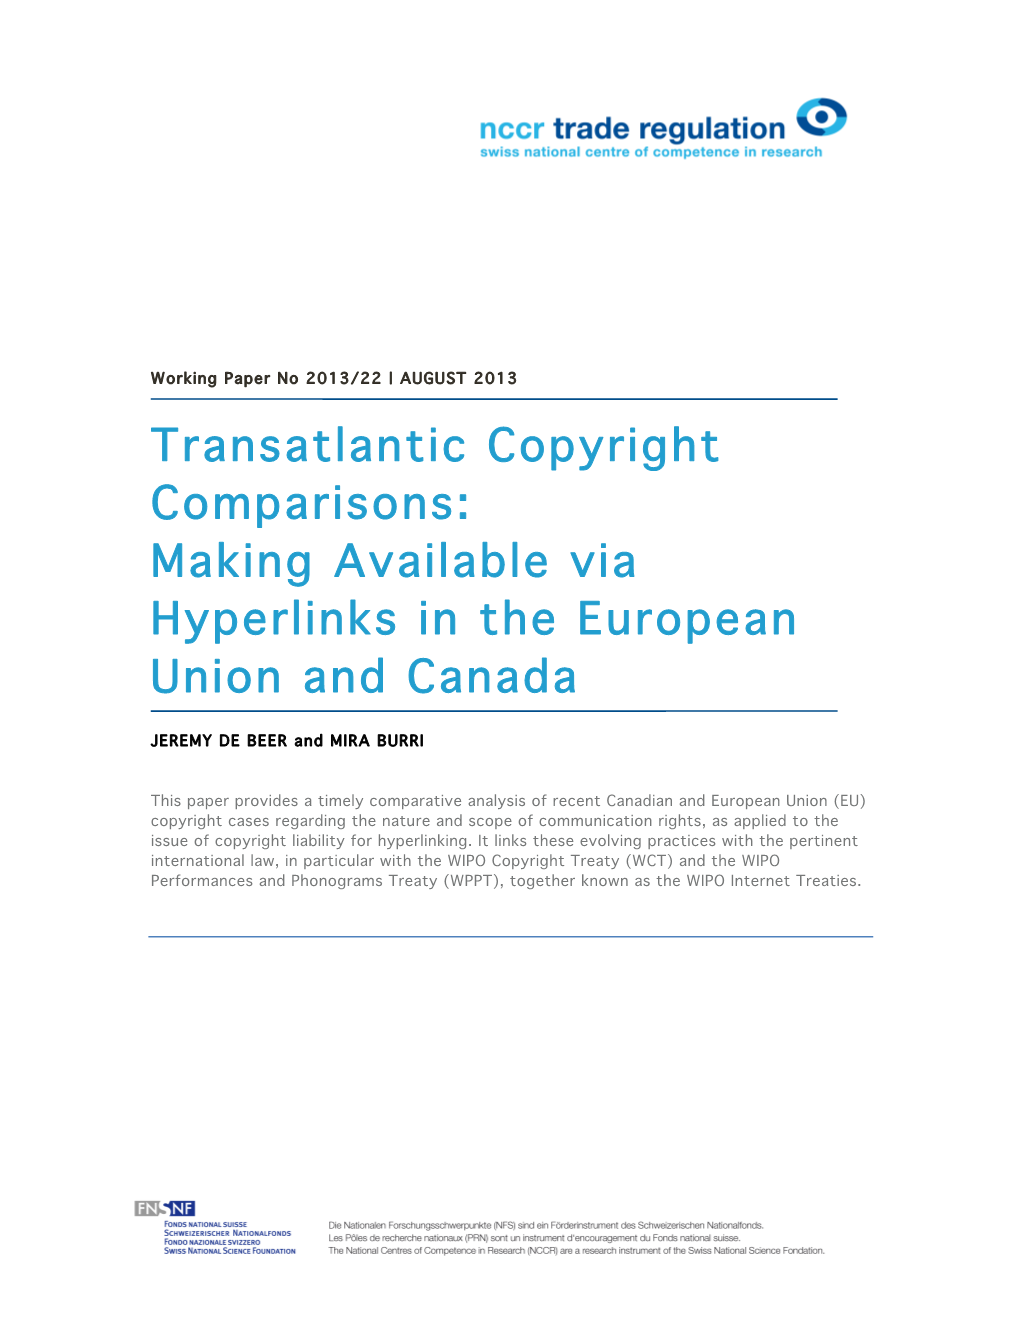 Making Available Via Hyperlinks in the European Union and Canada